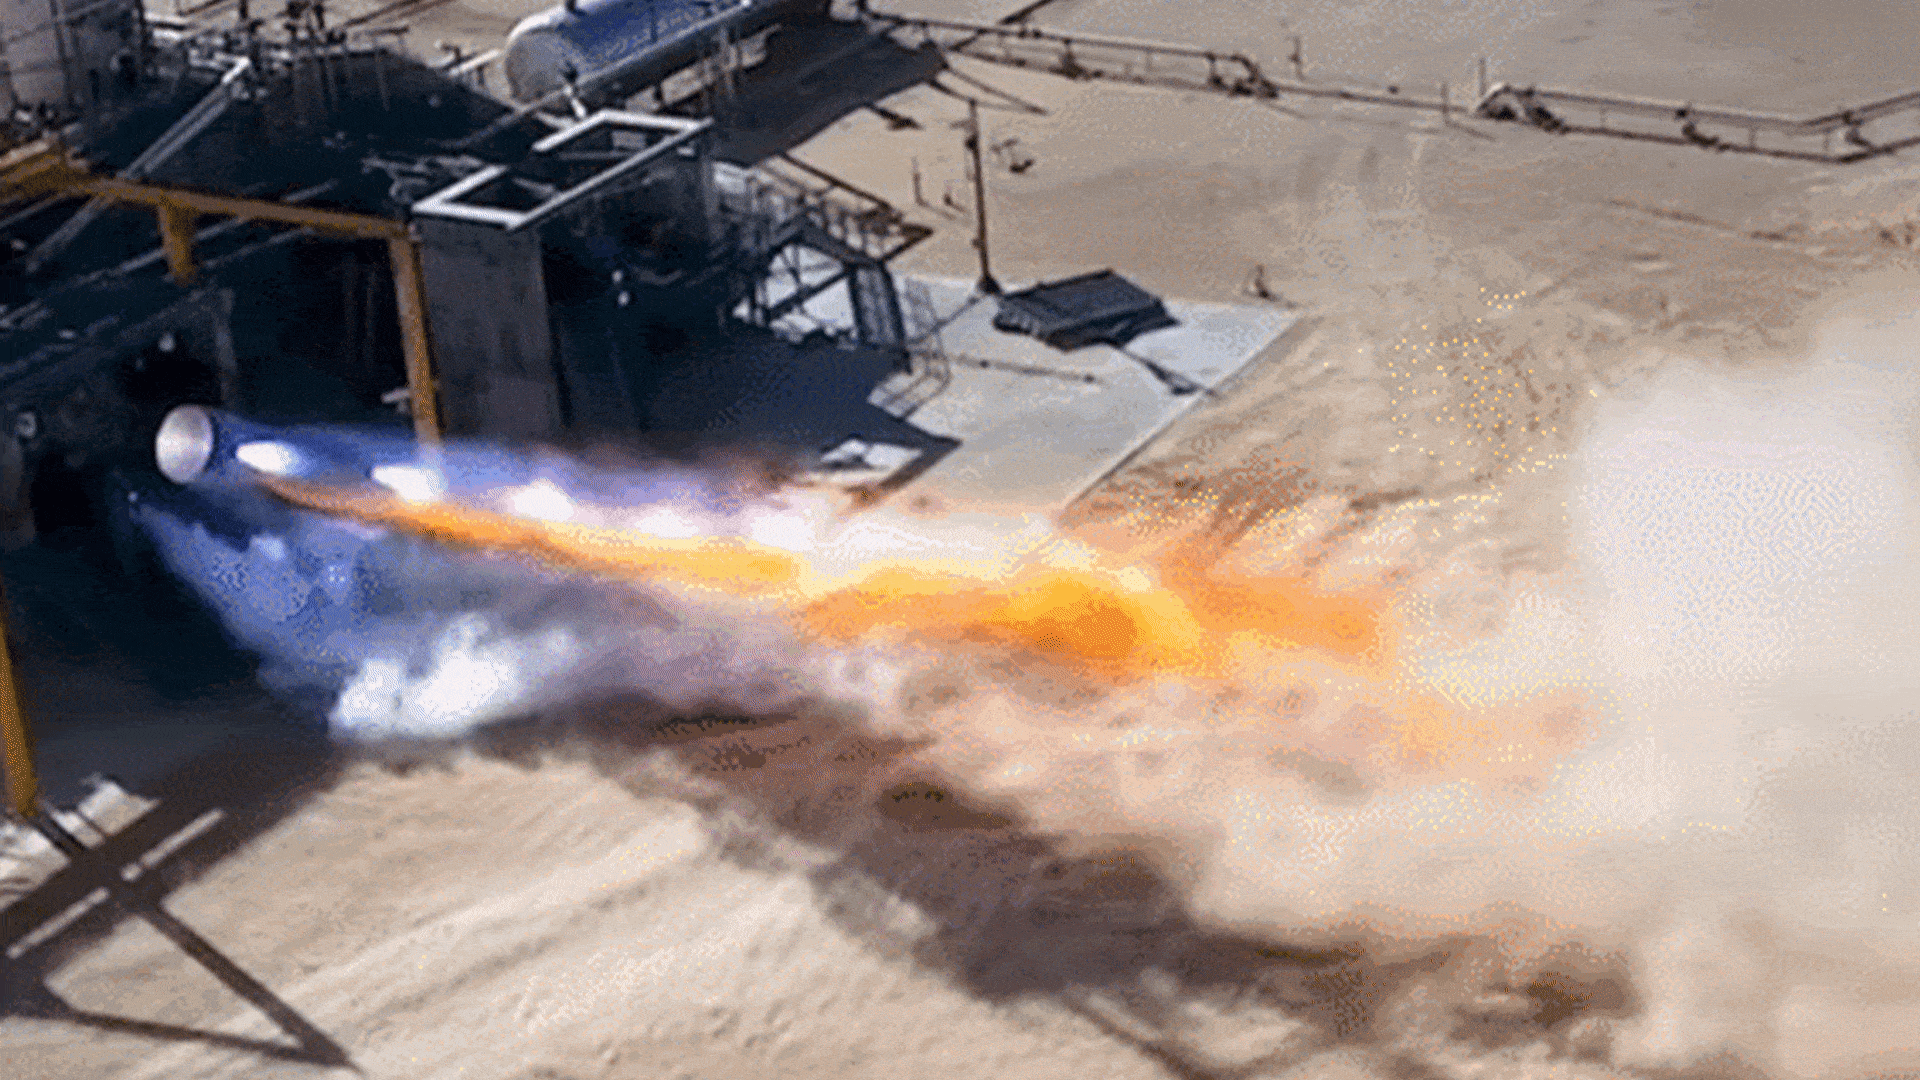 Blue Origin tests one of the BE-4 rocket engines the company is developing to launch its New Glenn rocket.